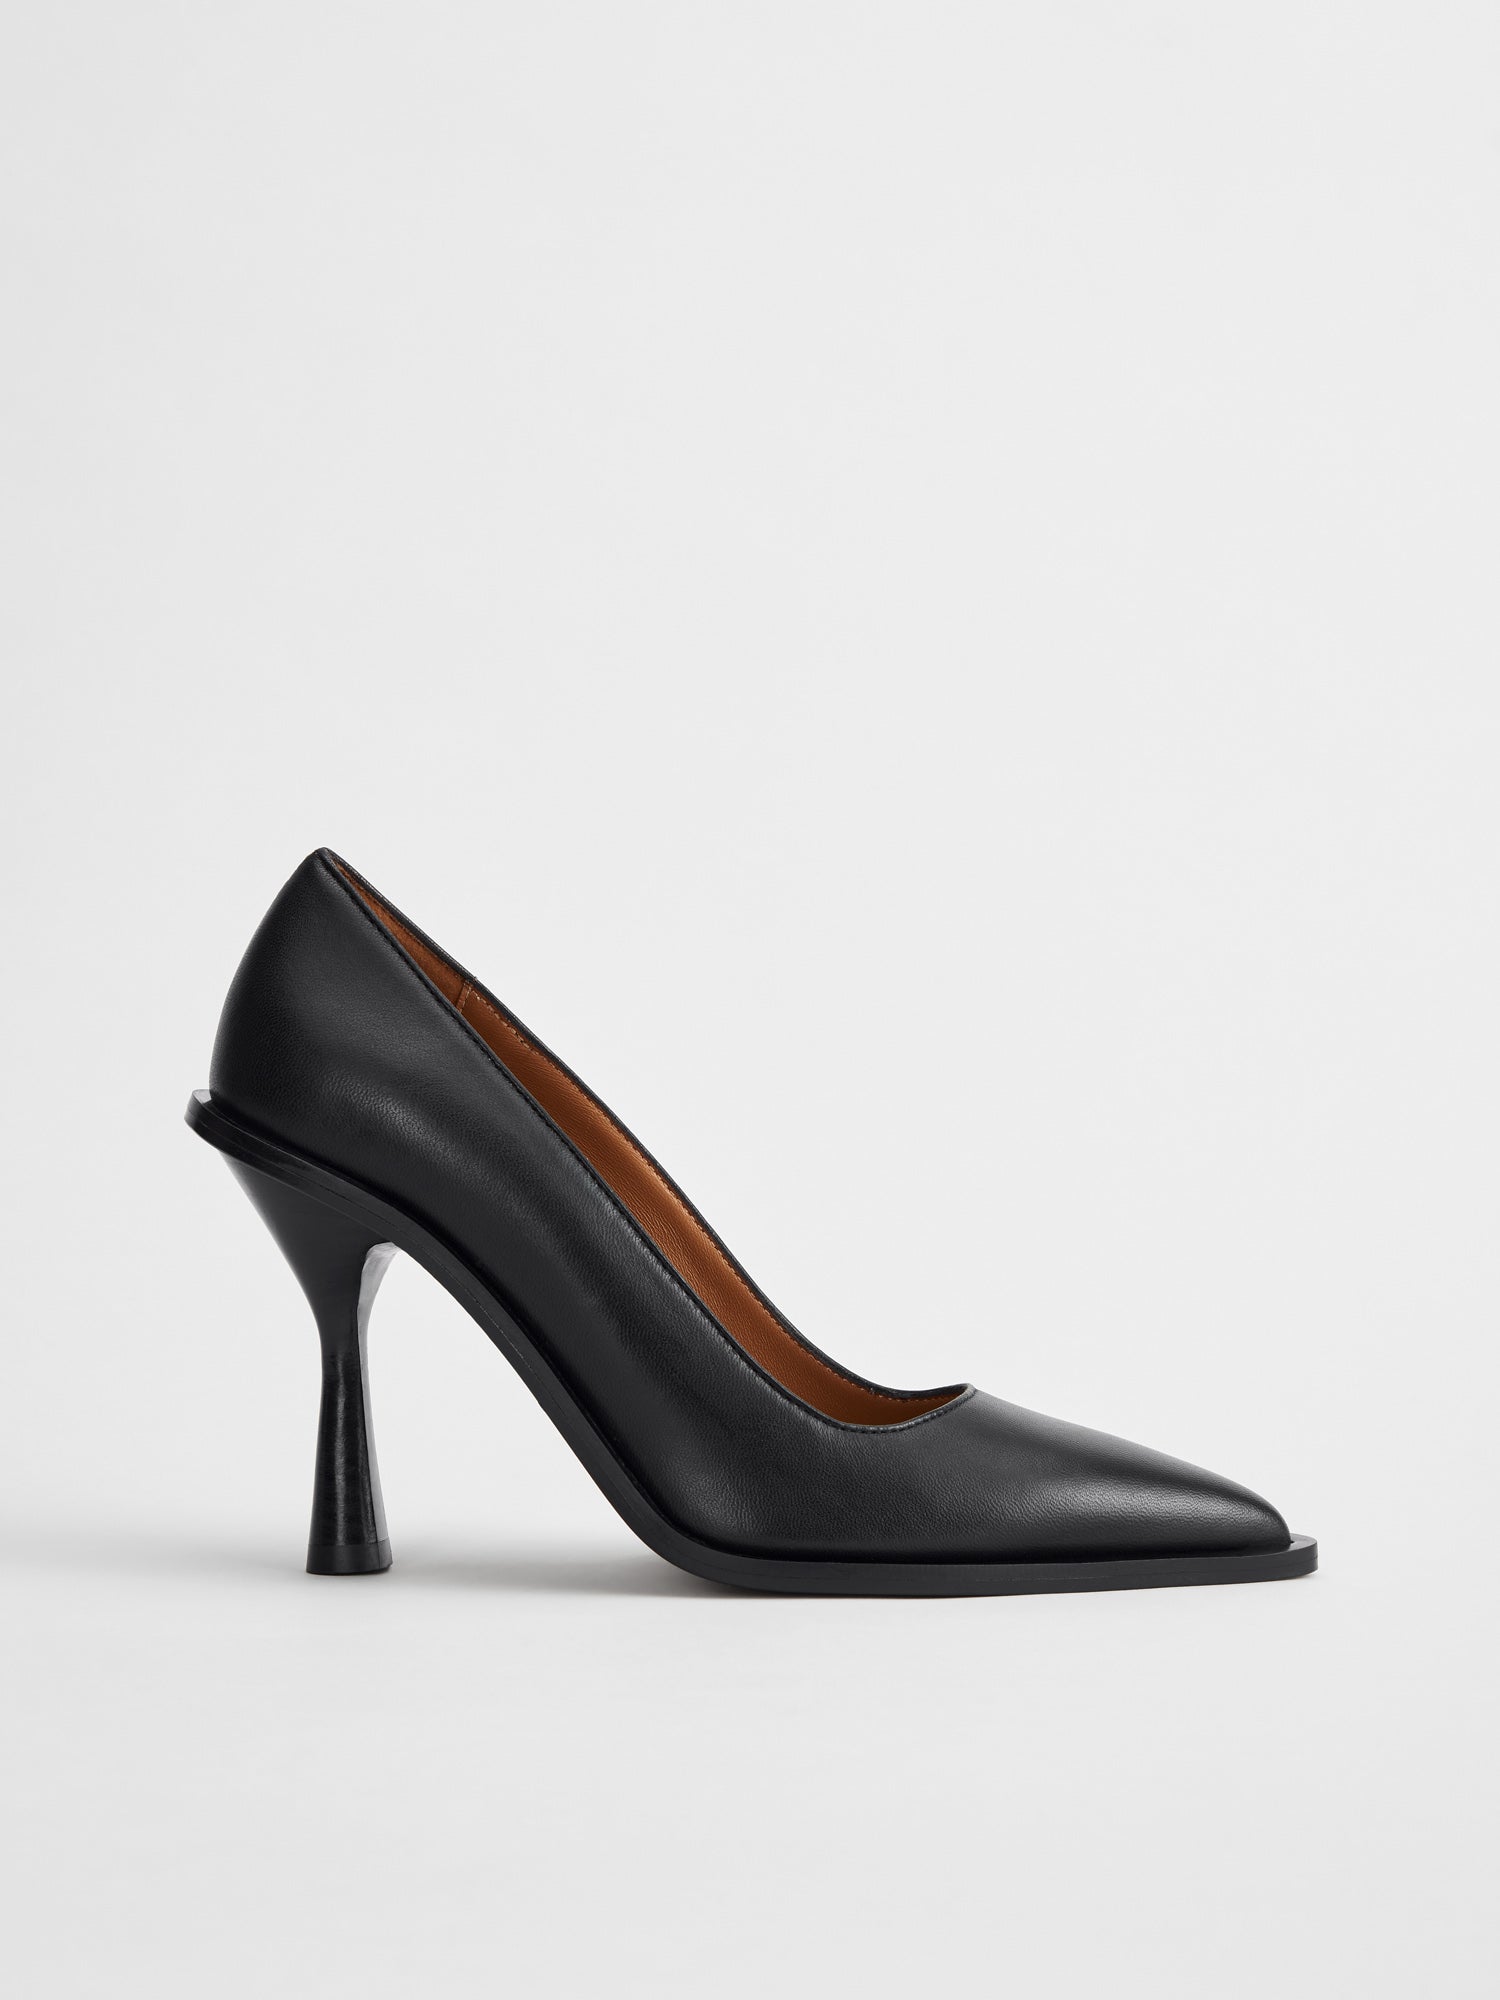 Ferrere pointed-toe leather pumps, black